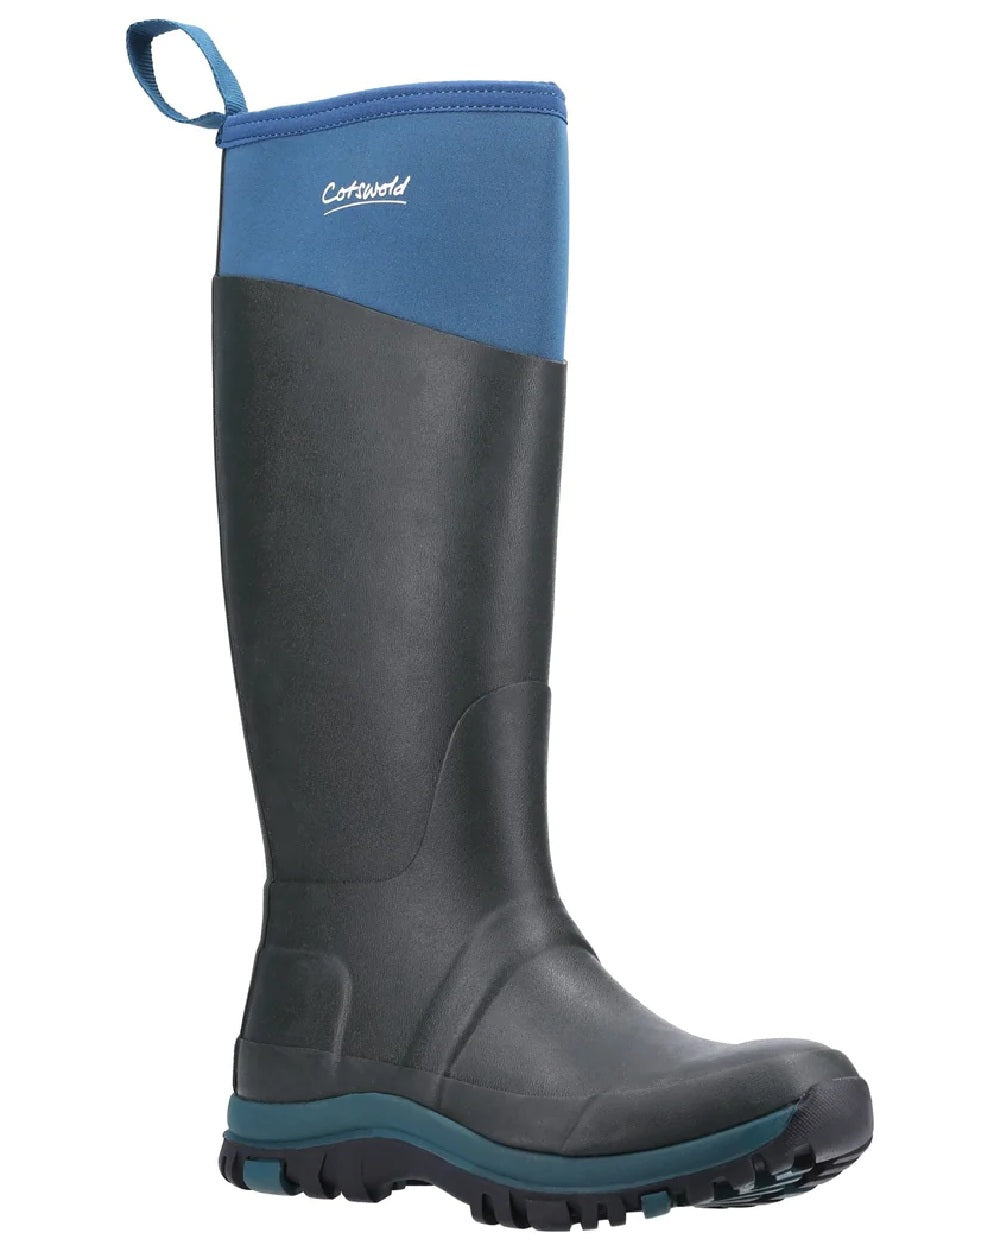 Cotswold Womens Wenworth Wellington Boots in Turquoise 